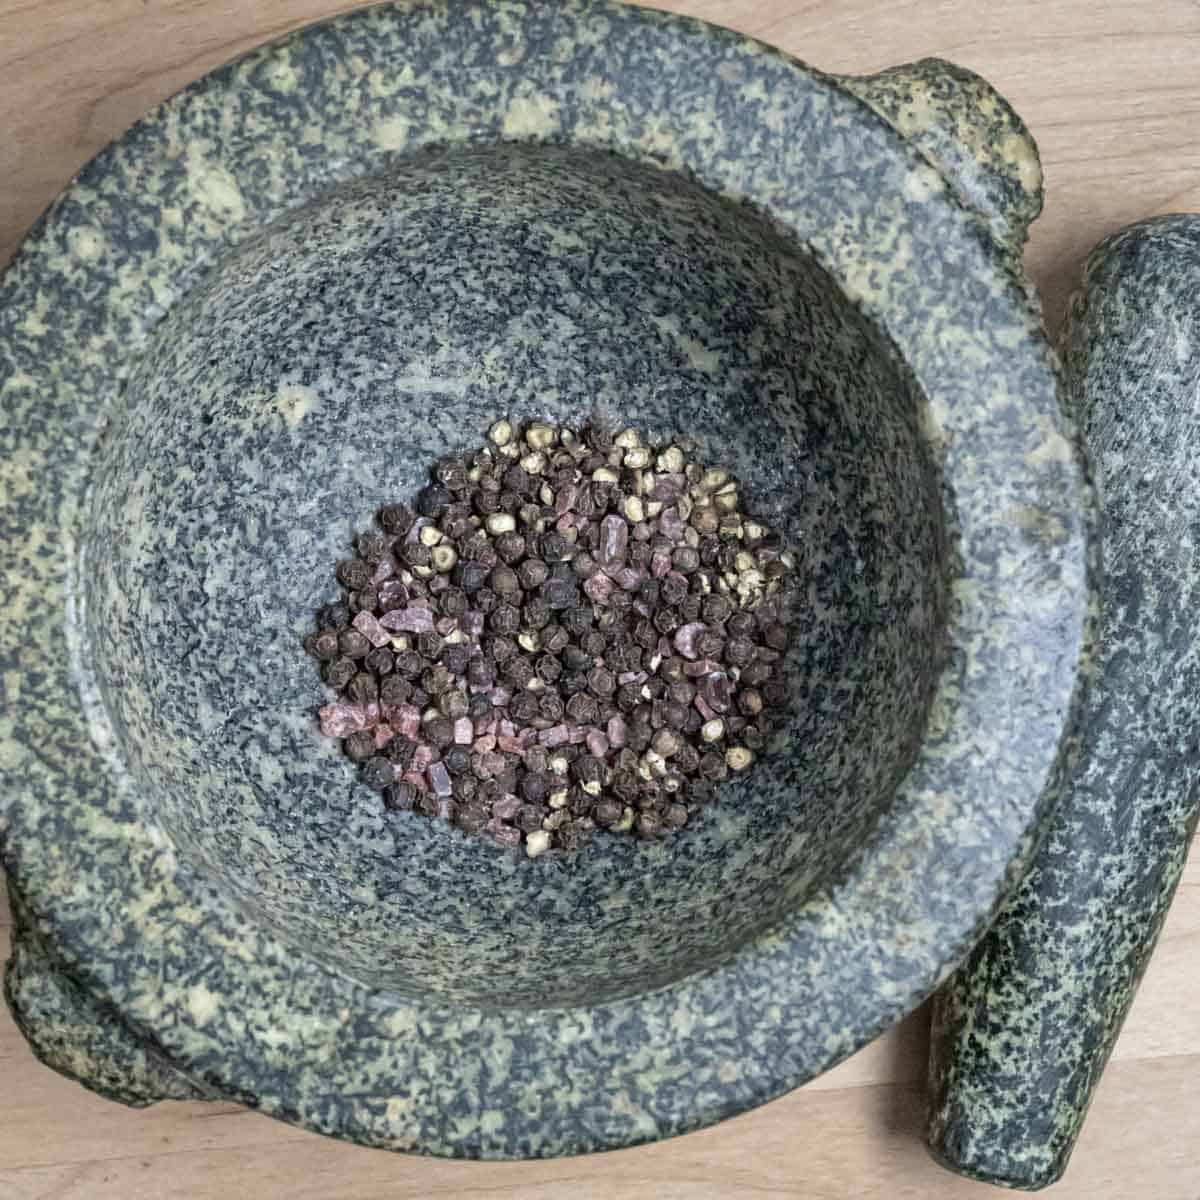 Peppercorns and coarse salt in a granite mortar with a pestle on the side.